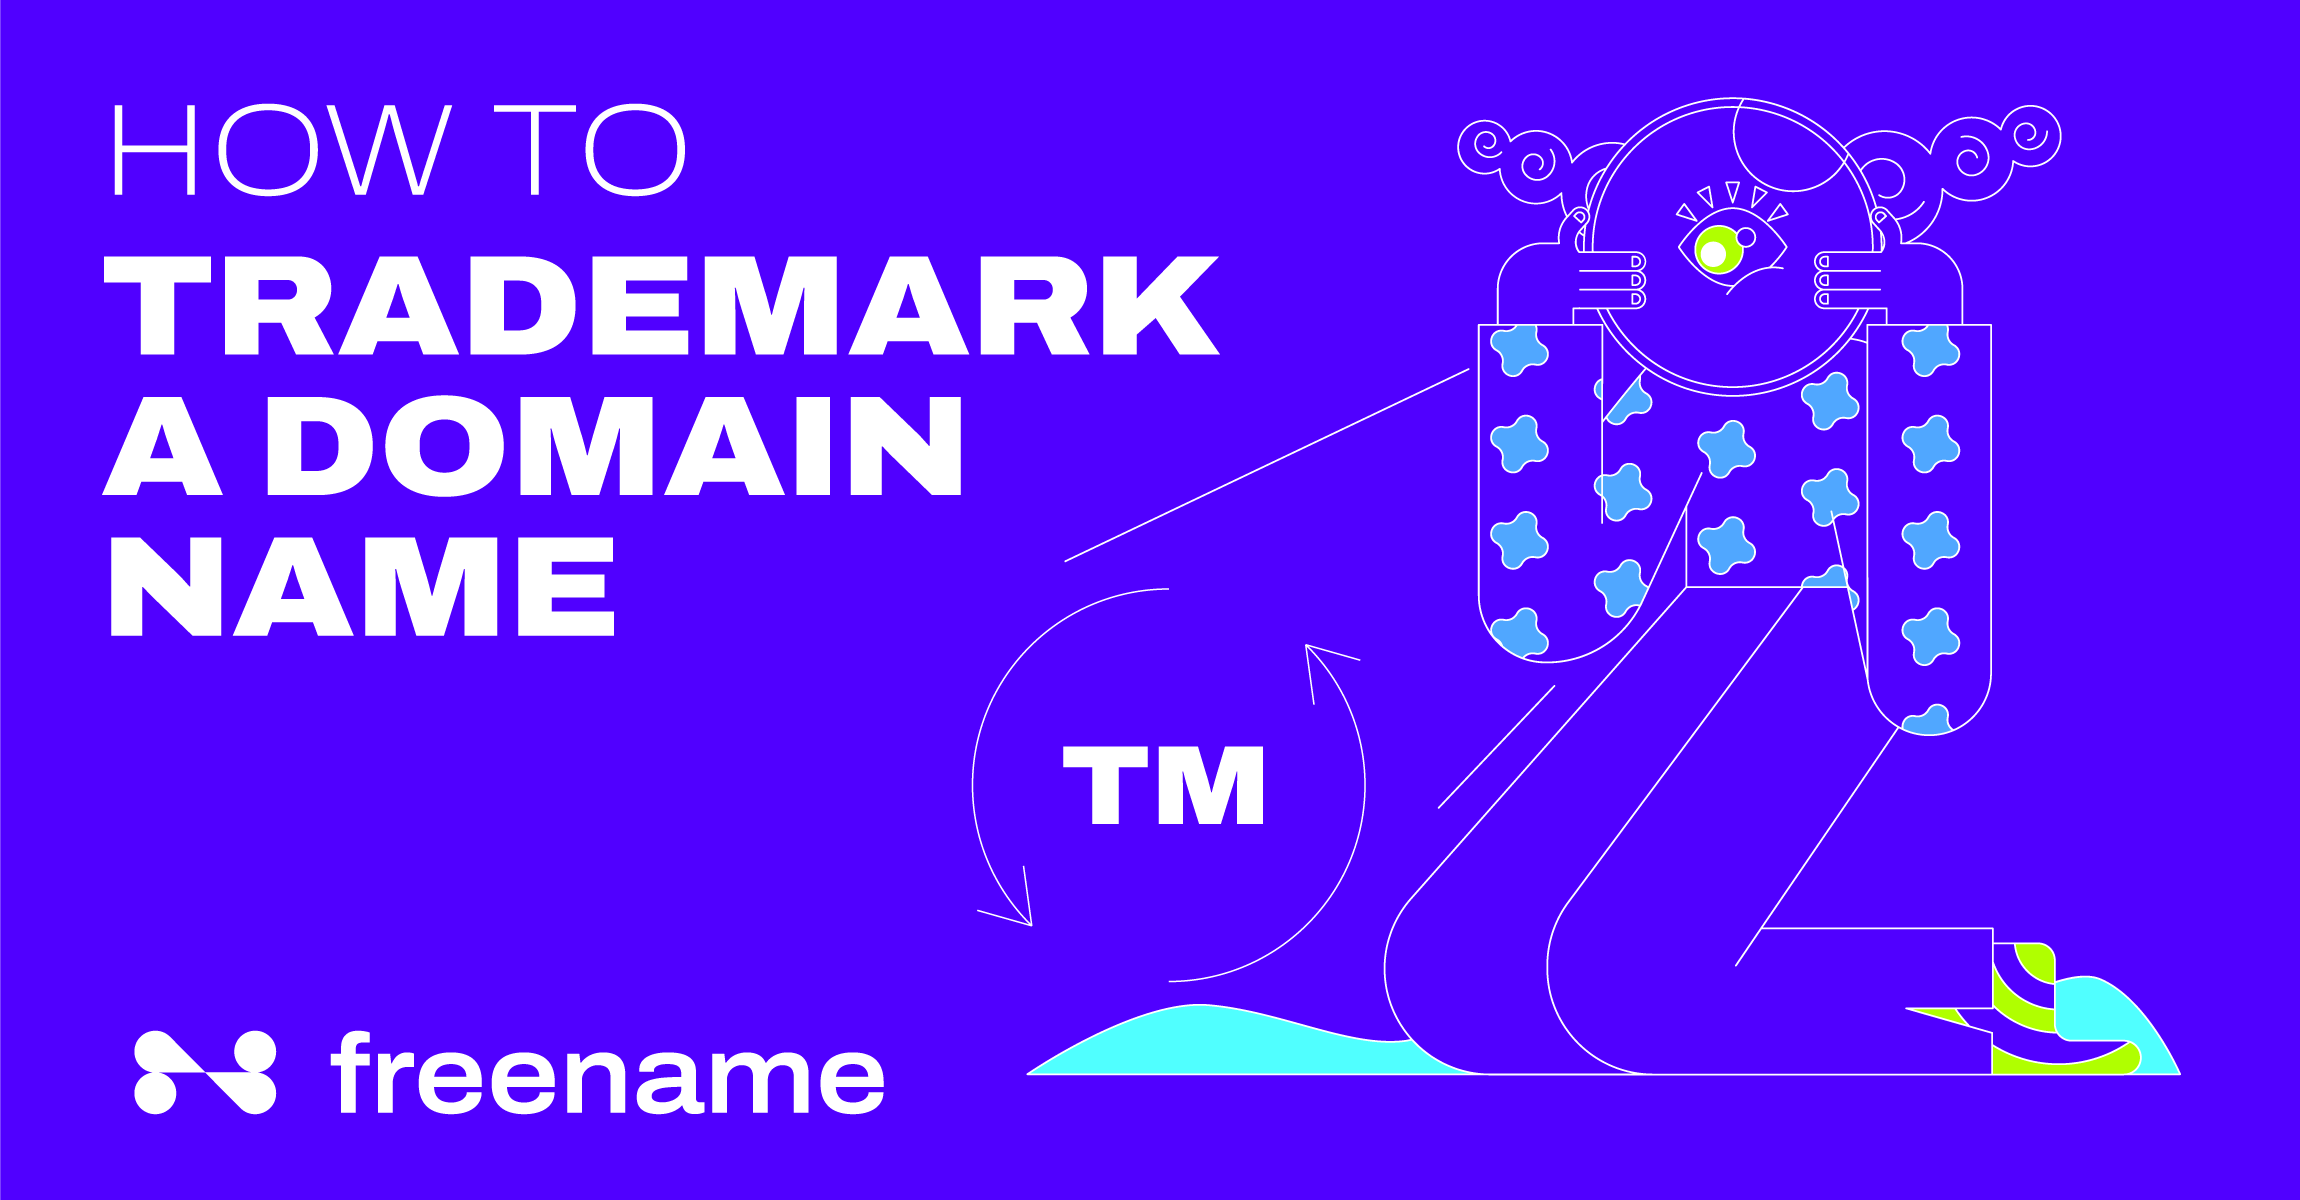 How to Trademark a Domain Name